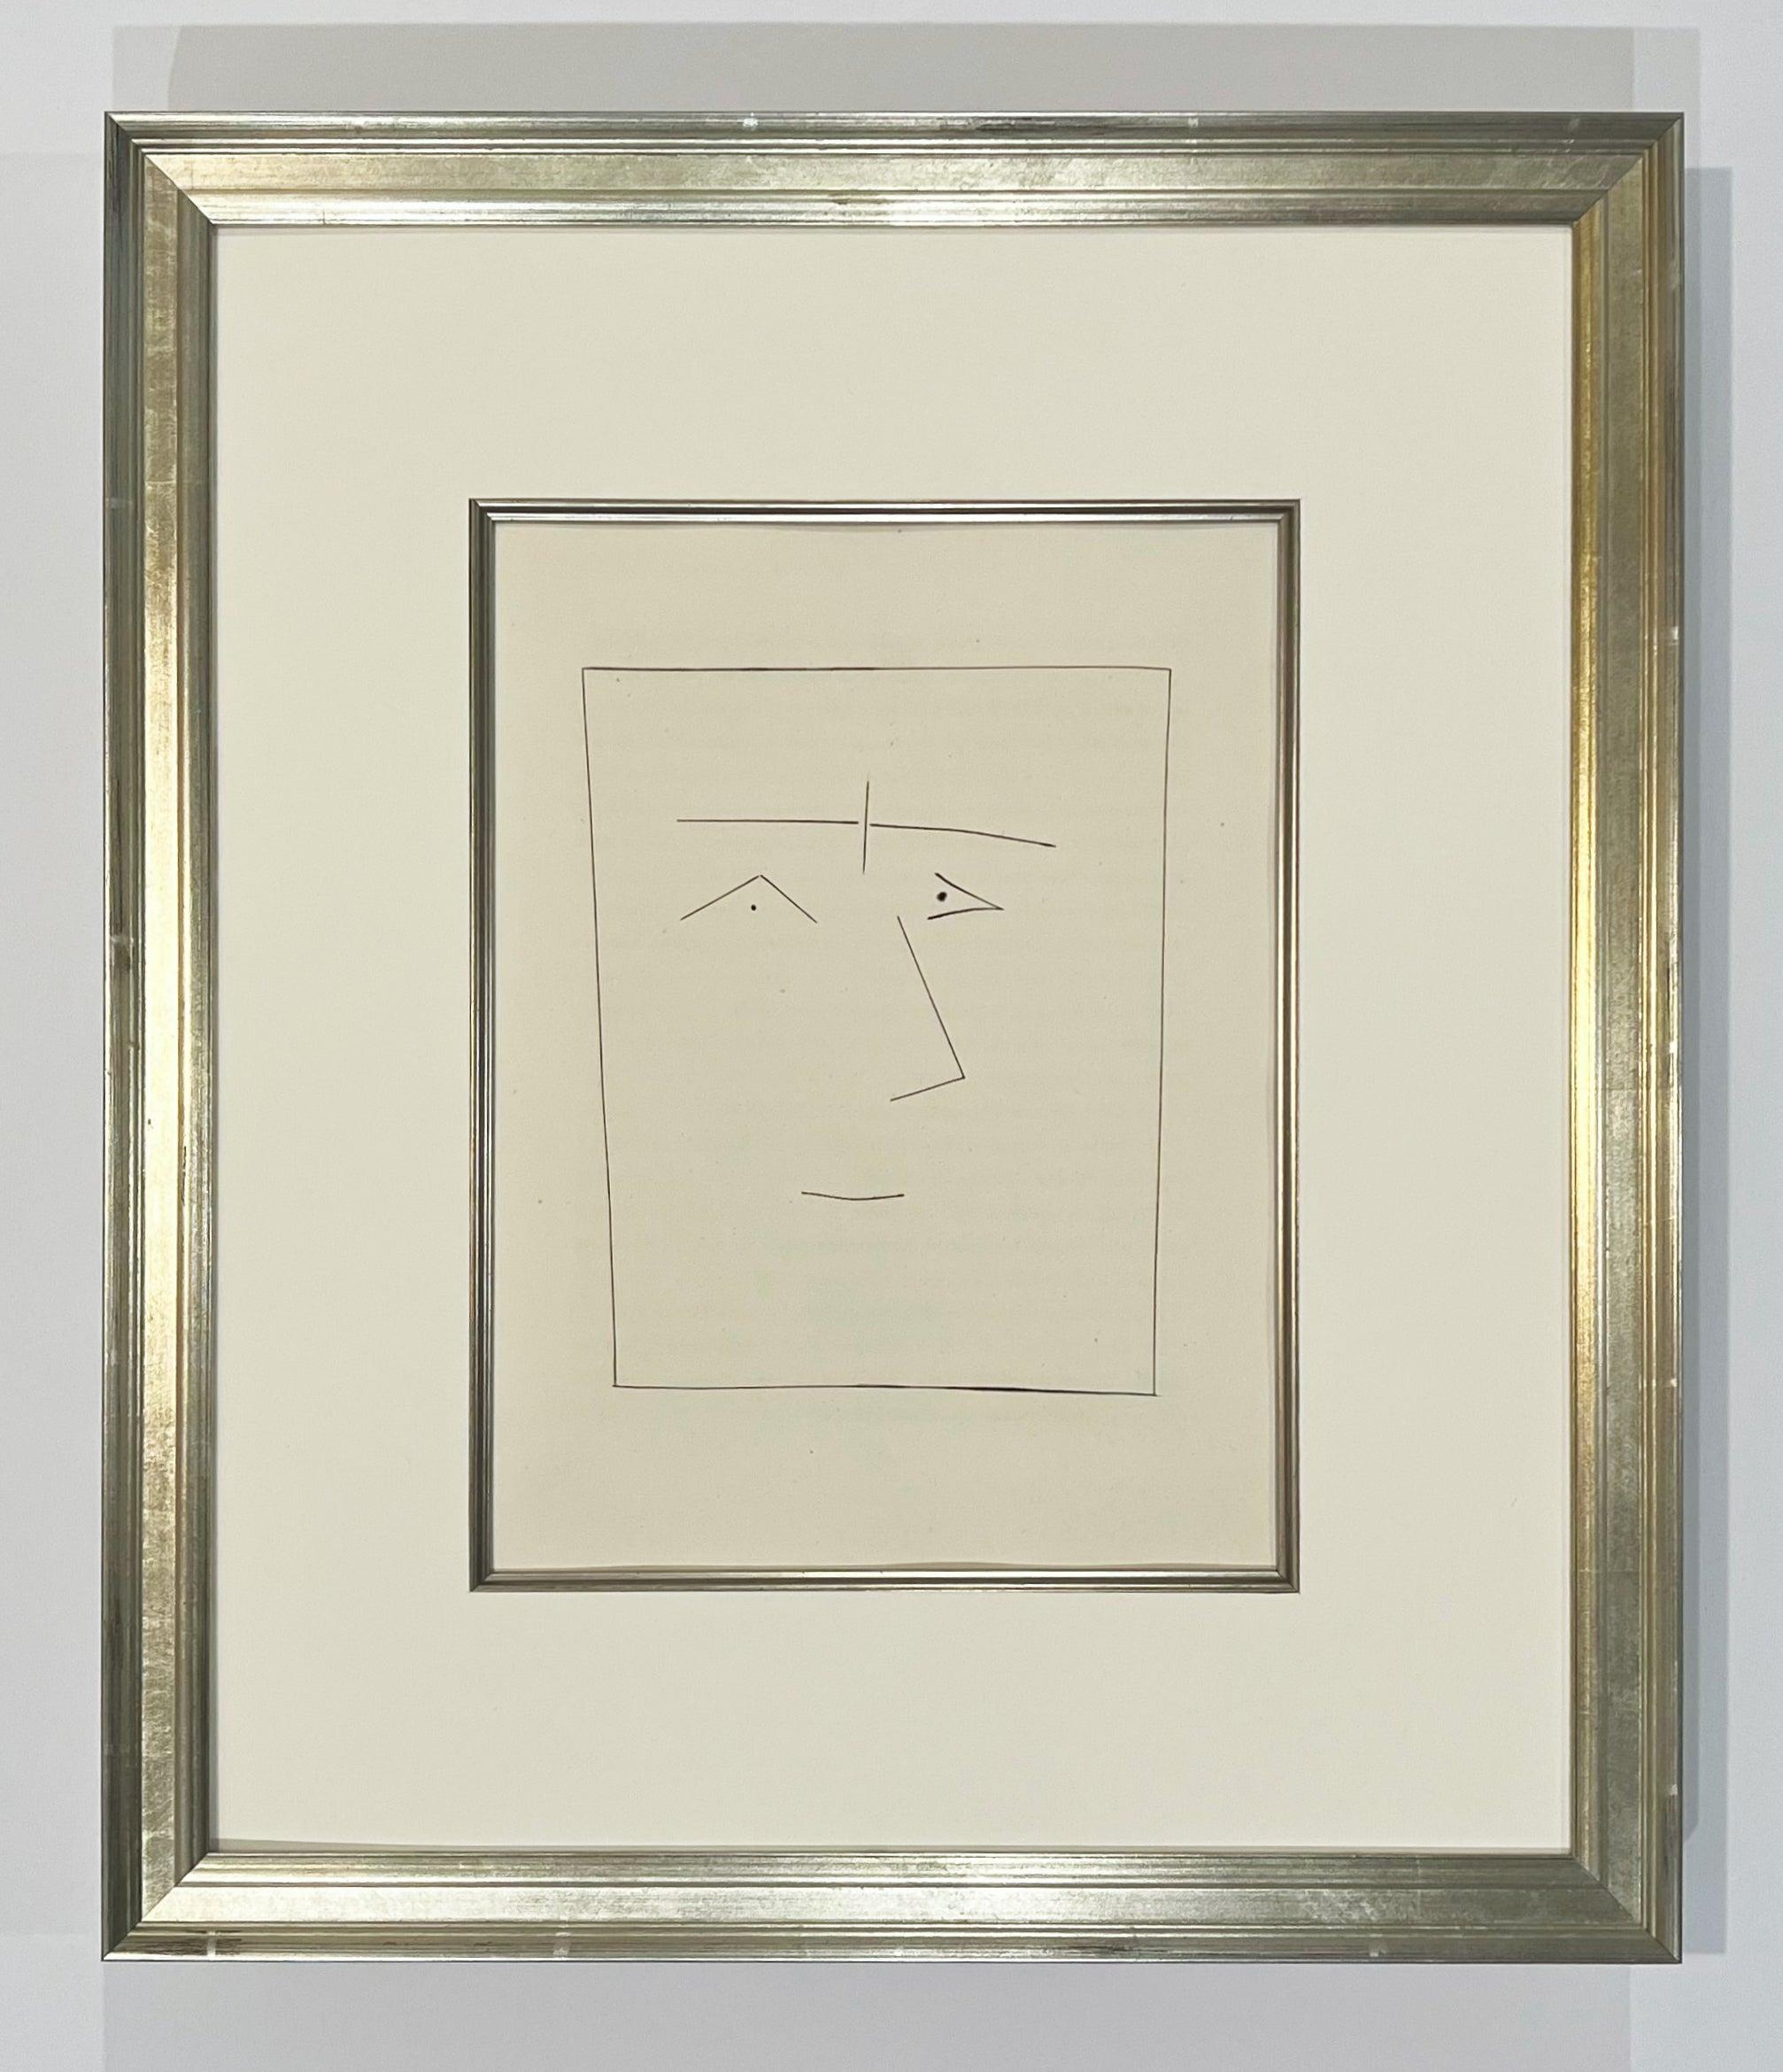 Square Head of a Man with Joined Eyebrows (Plate V), from Carmen - Print by Pablo Picasso